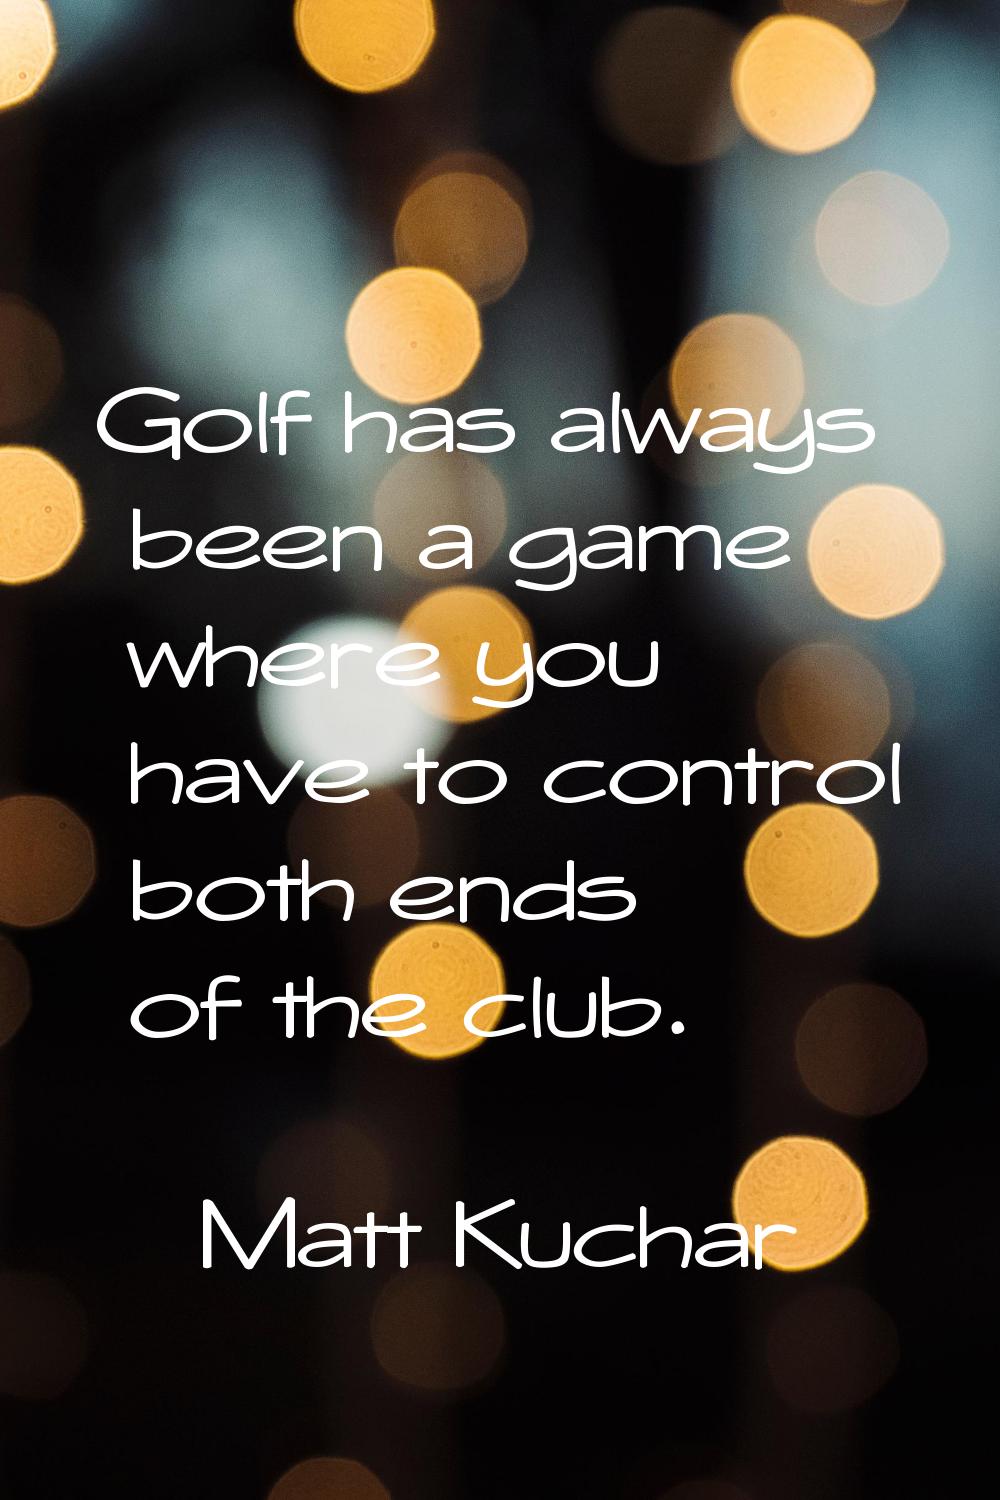 Golf has always been a game where you have to control both ends of the club.